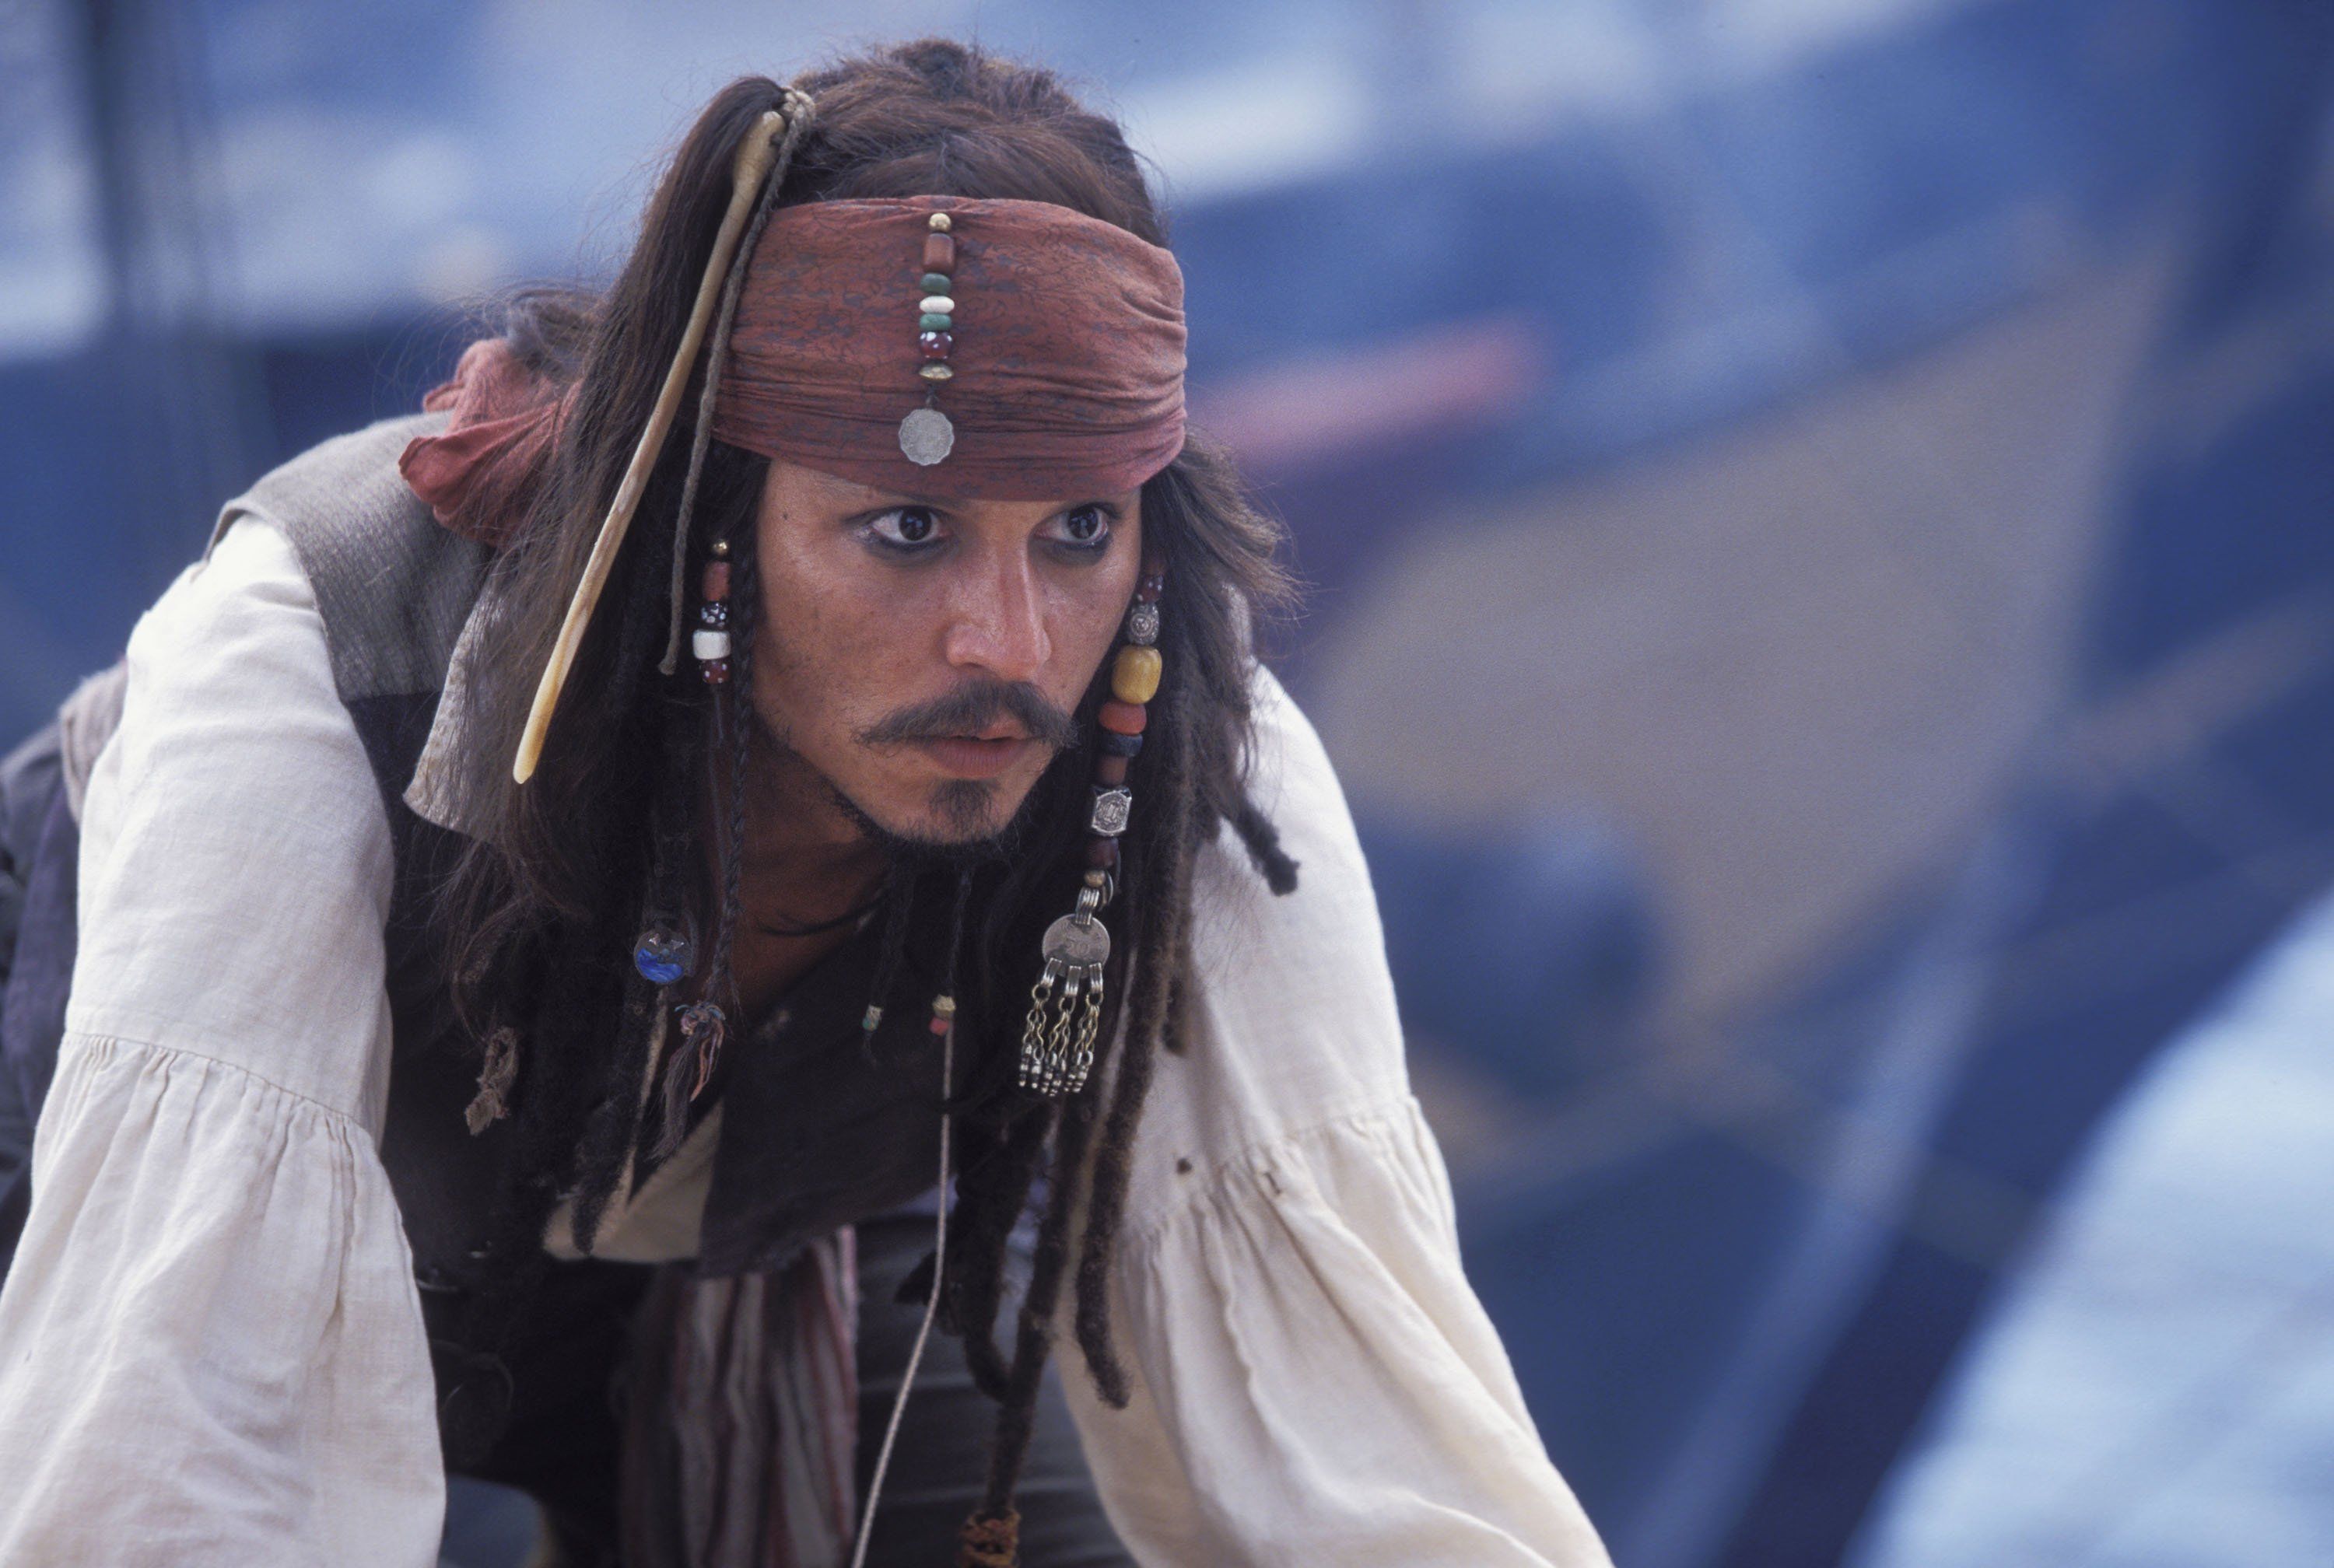 johnny depp, jack sparrow, pirates of the caribbean: the curse of the black pearl, movie, pirates of the caribbean HD wallpaper